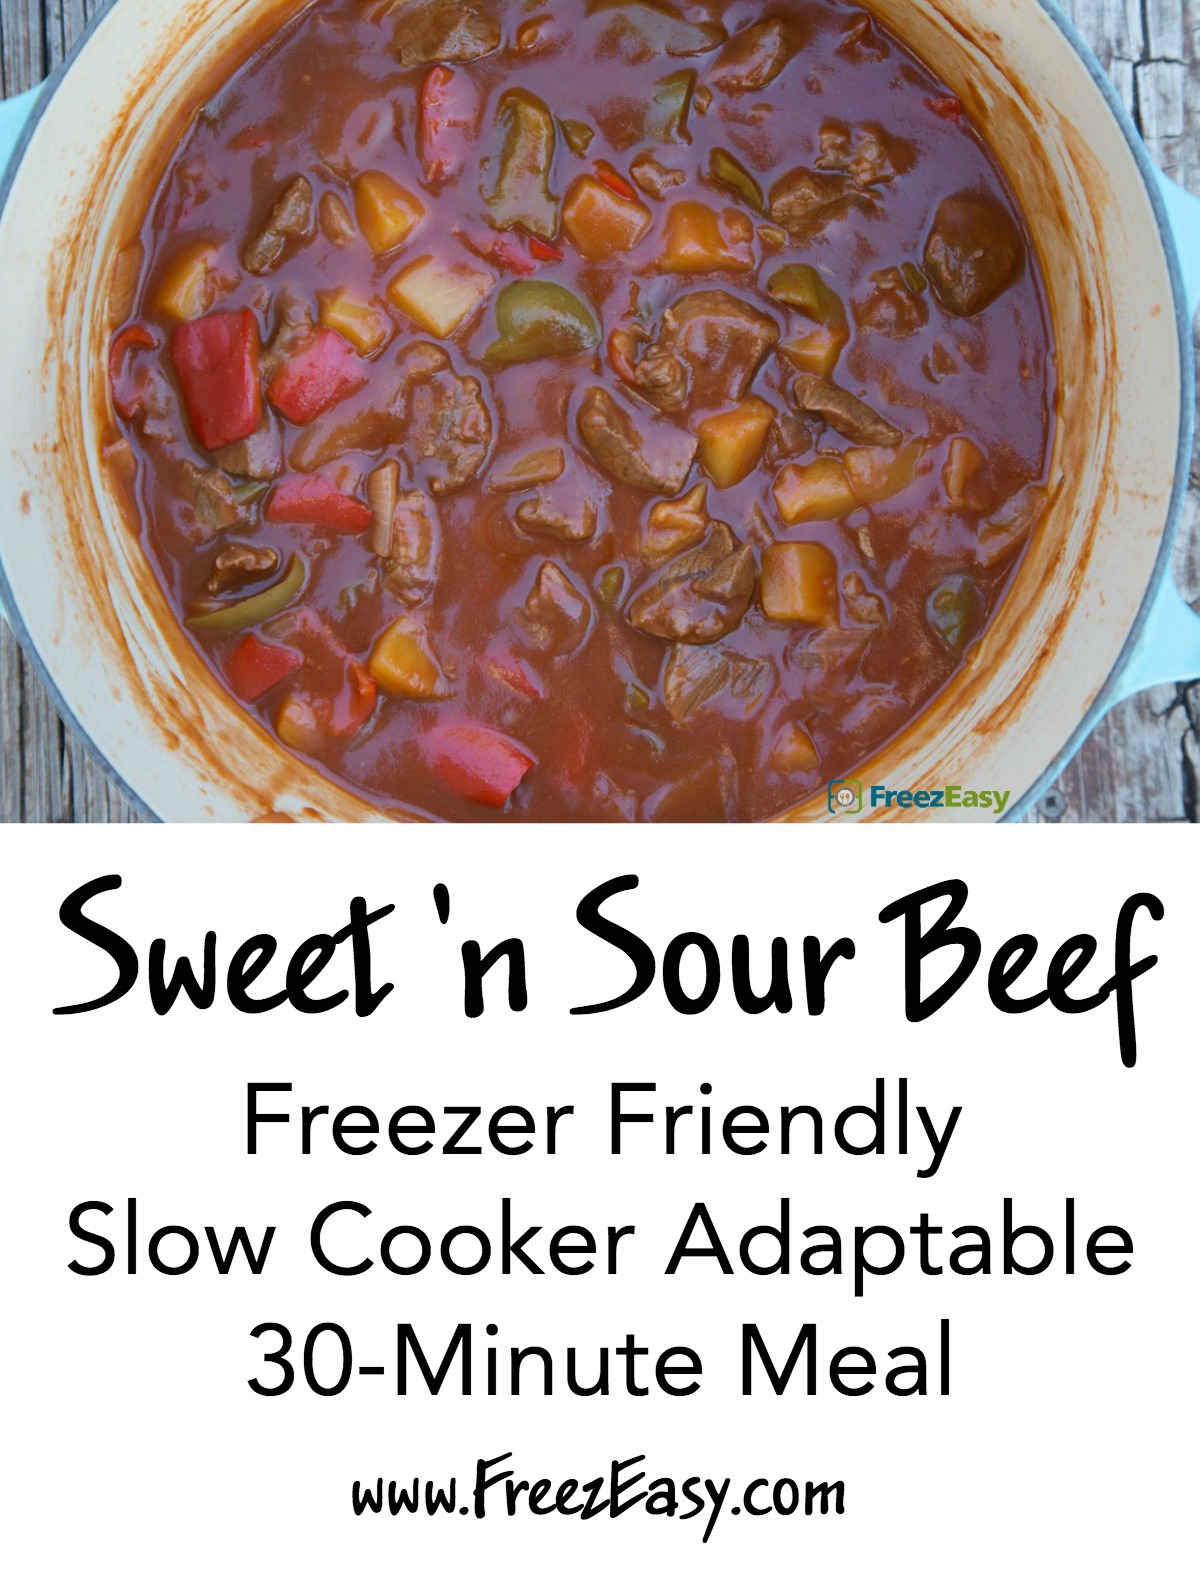 Sweet n Sour Beef on FreezEasy.com